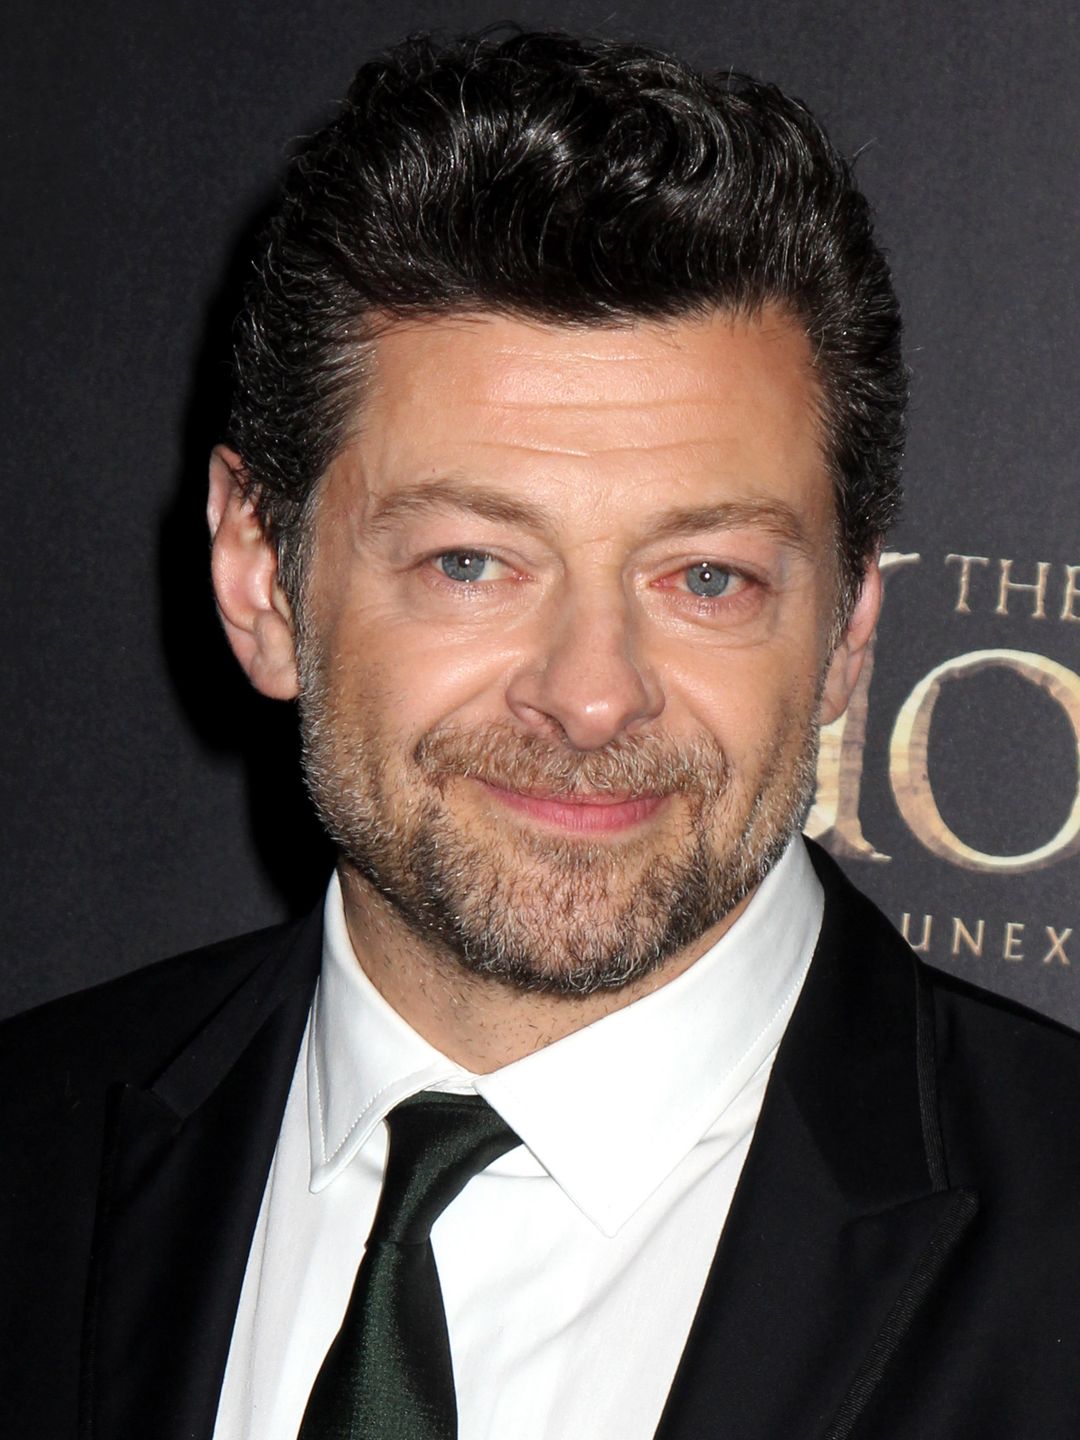 Andy Serkis interesting facts